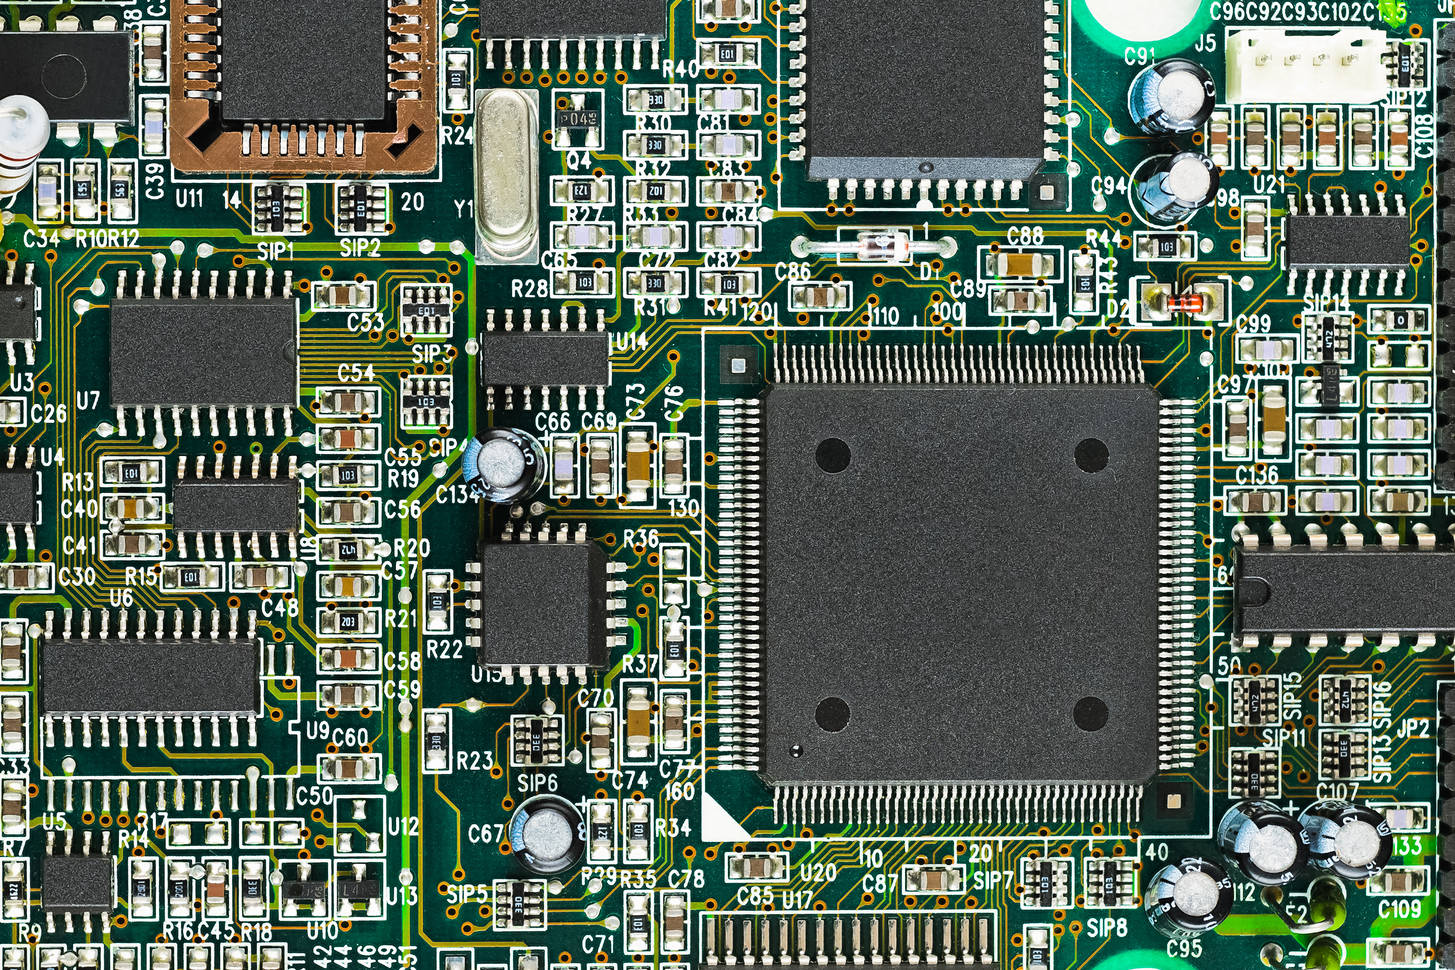 Close up of a printed circuit board Jigsaw Puzzle (Stuff Electronics